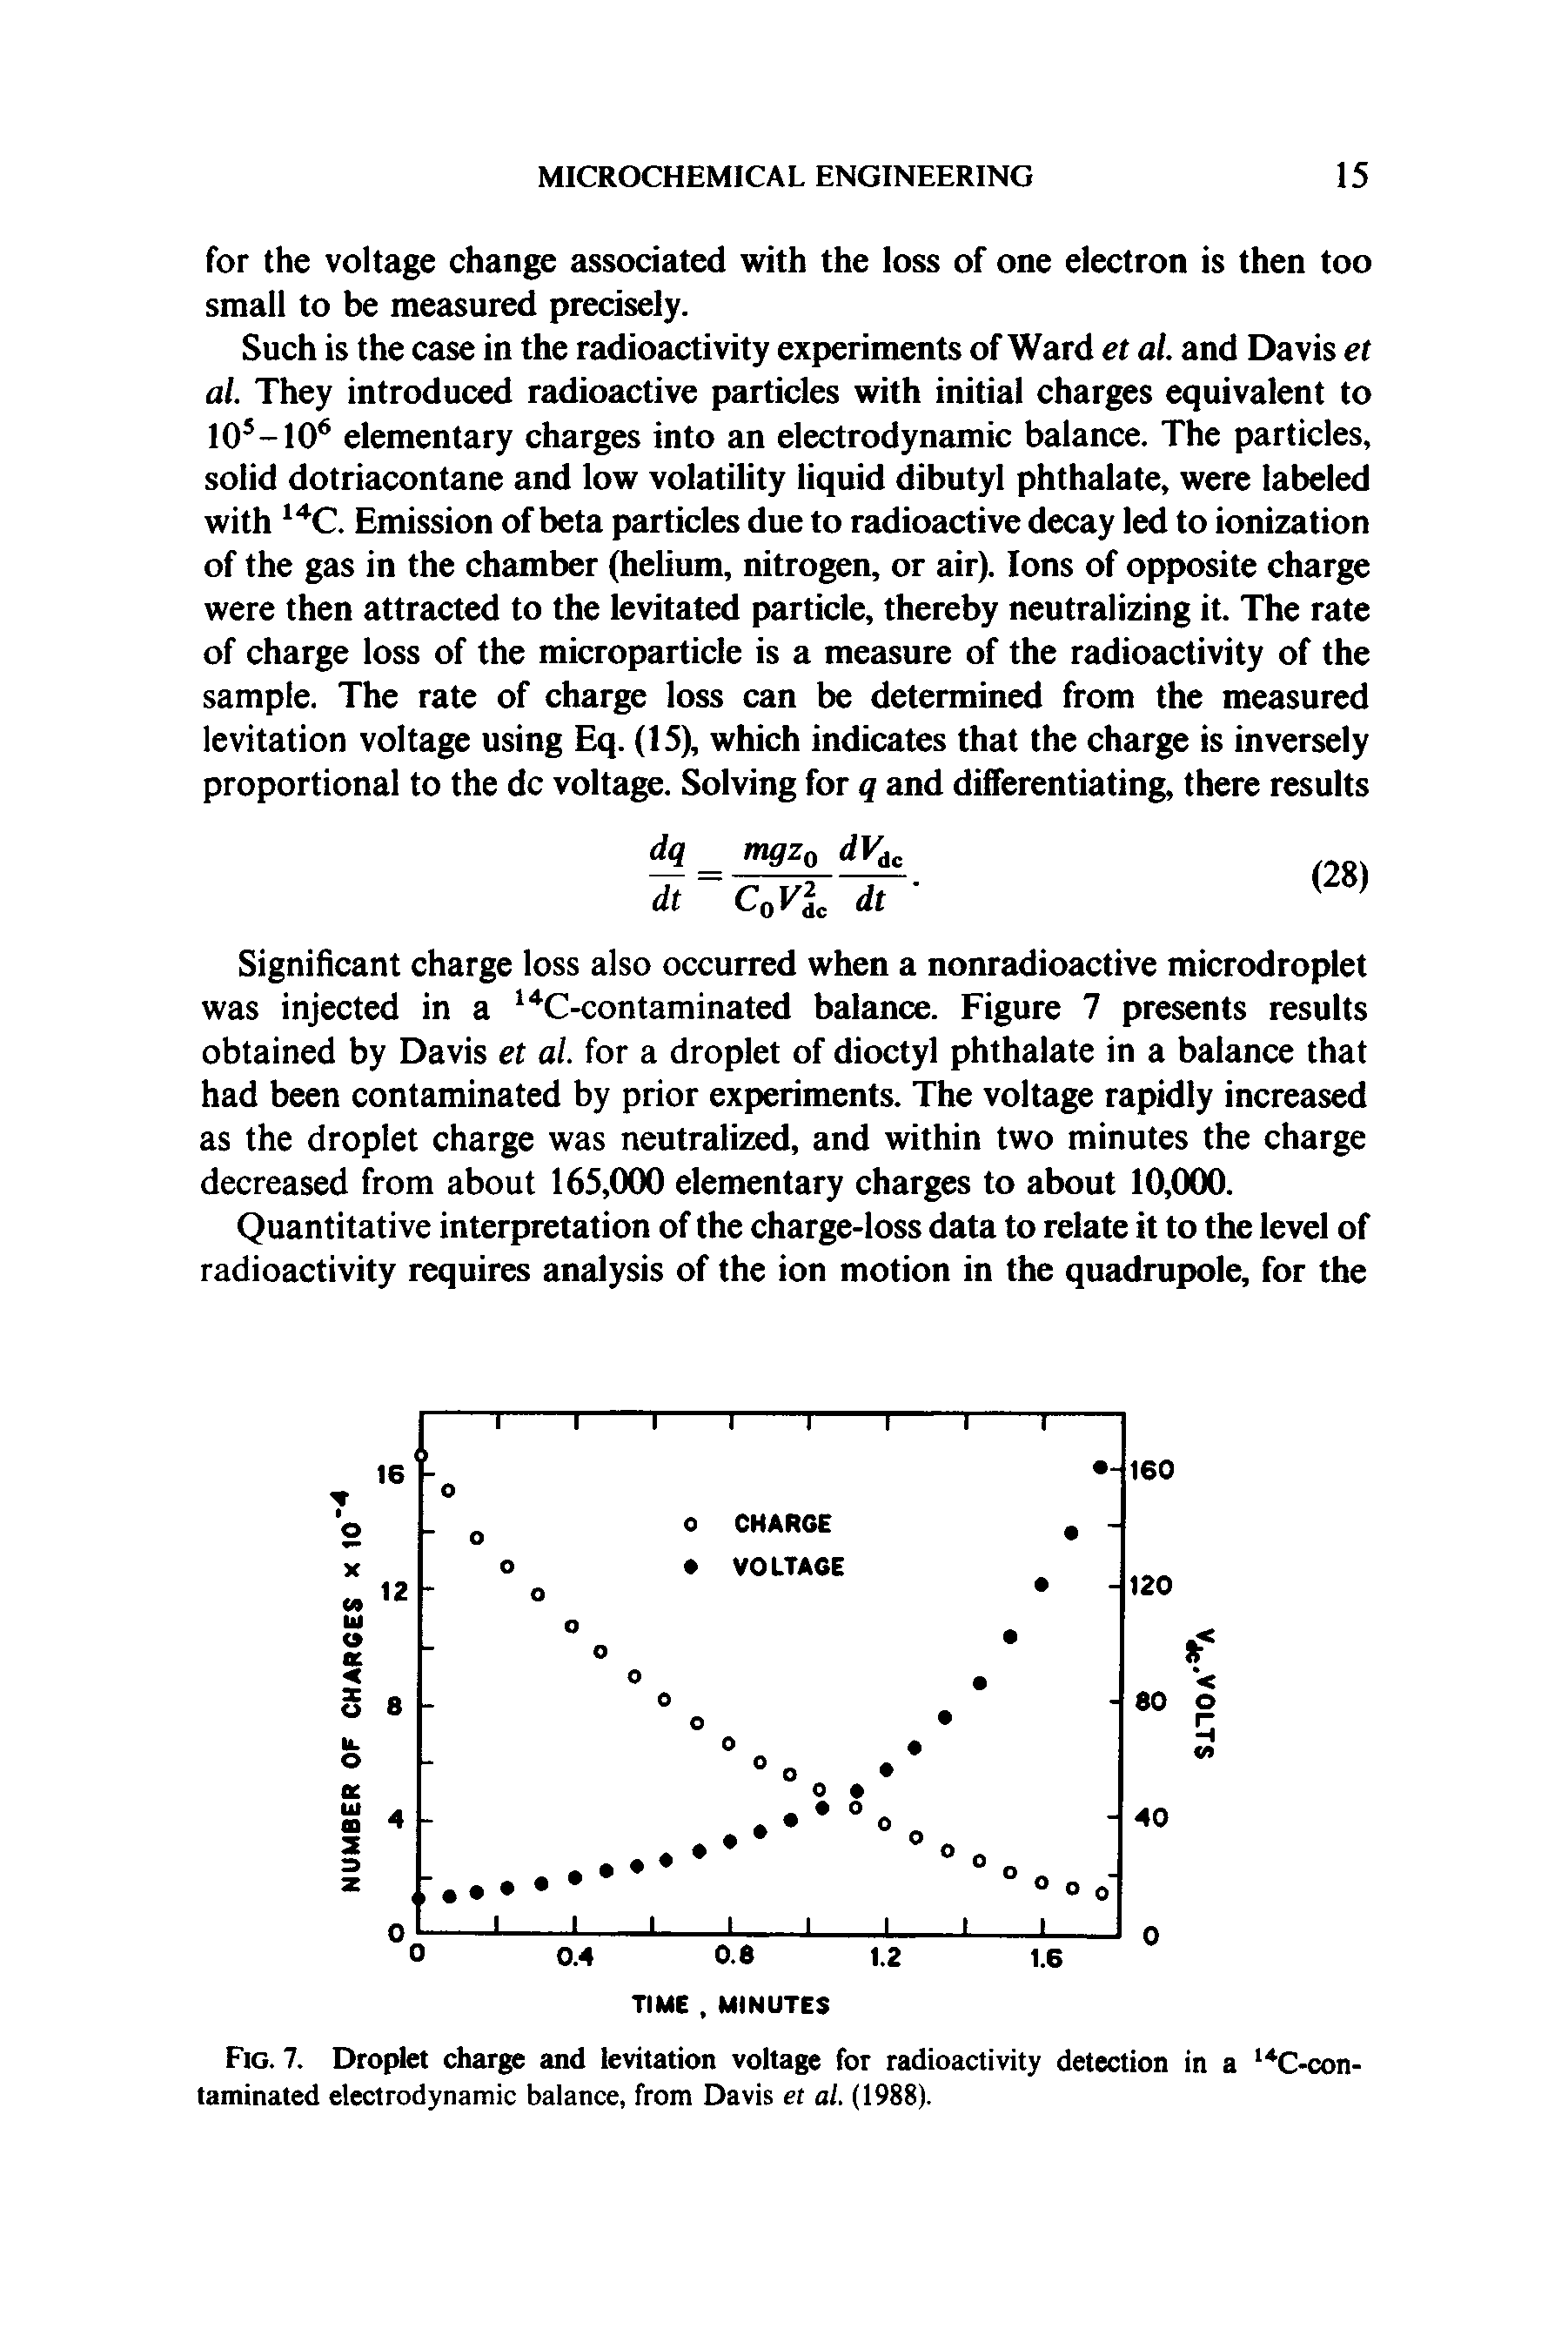 Fig. 7. Droplet charge and levitation voltage for radioactivity detection in a C-con-taminated electrodynamic balance, from Davis et al. (1988).